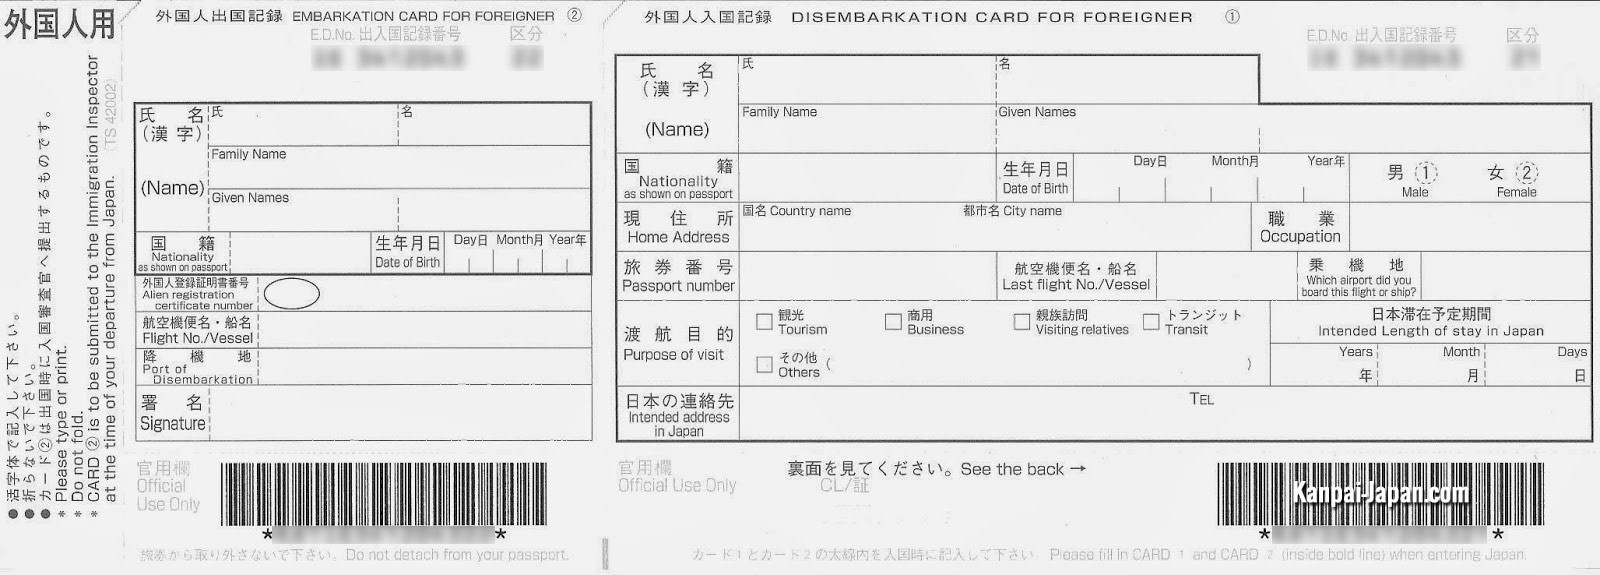 The Japanese Disembarkation Card for Foreigners